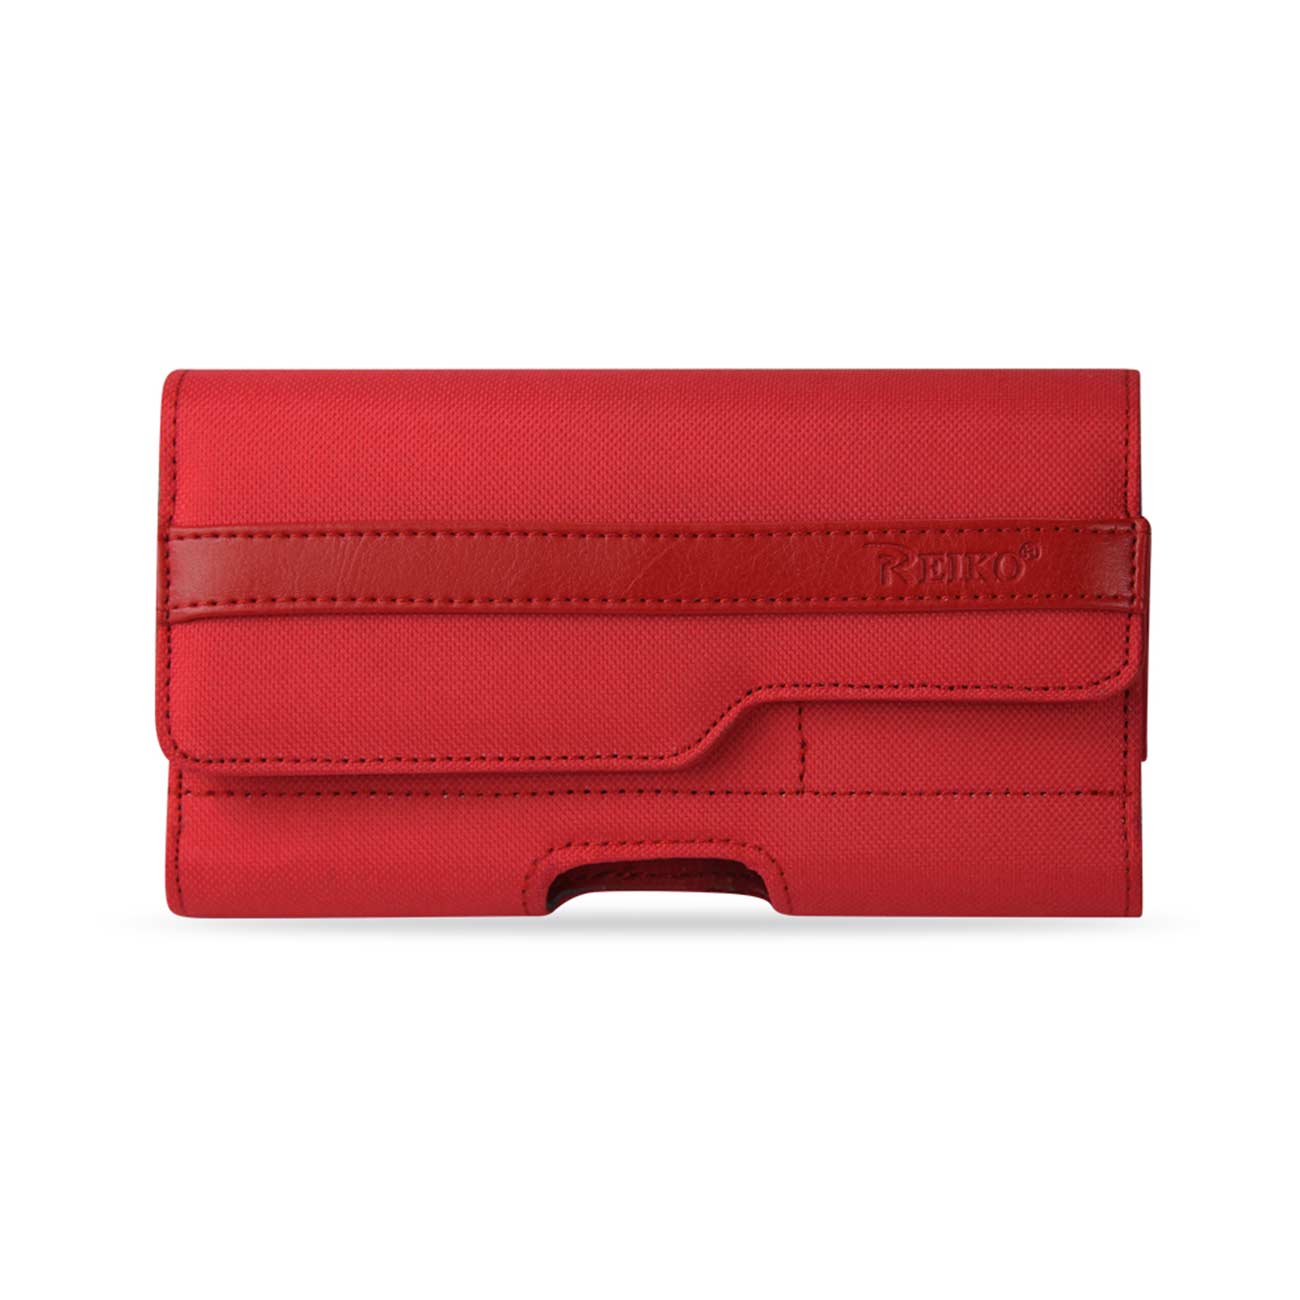 Reiko Rugged Pouch With Card Holder In Red (6.6X3.5X0.7 Inches)